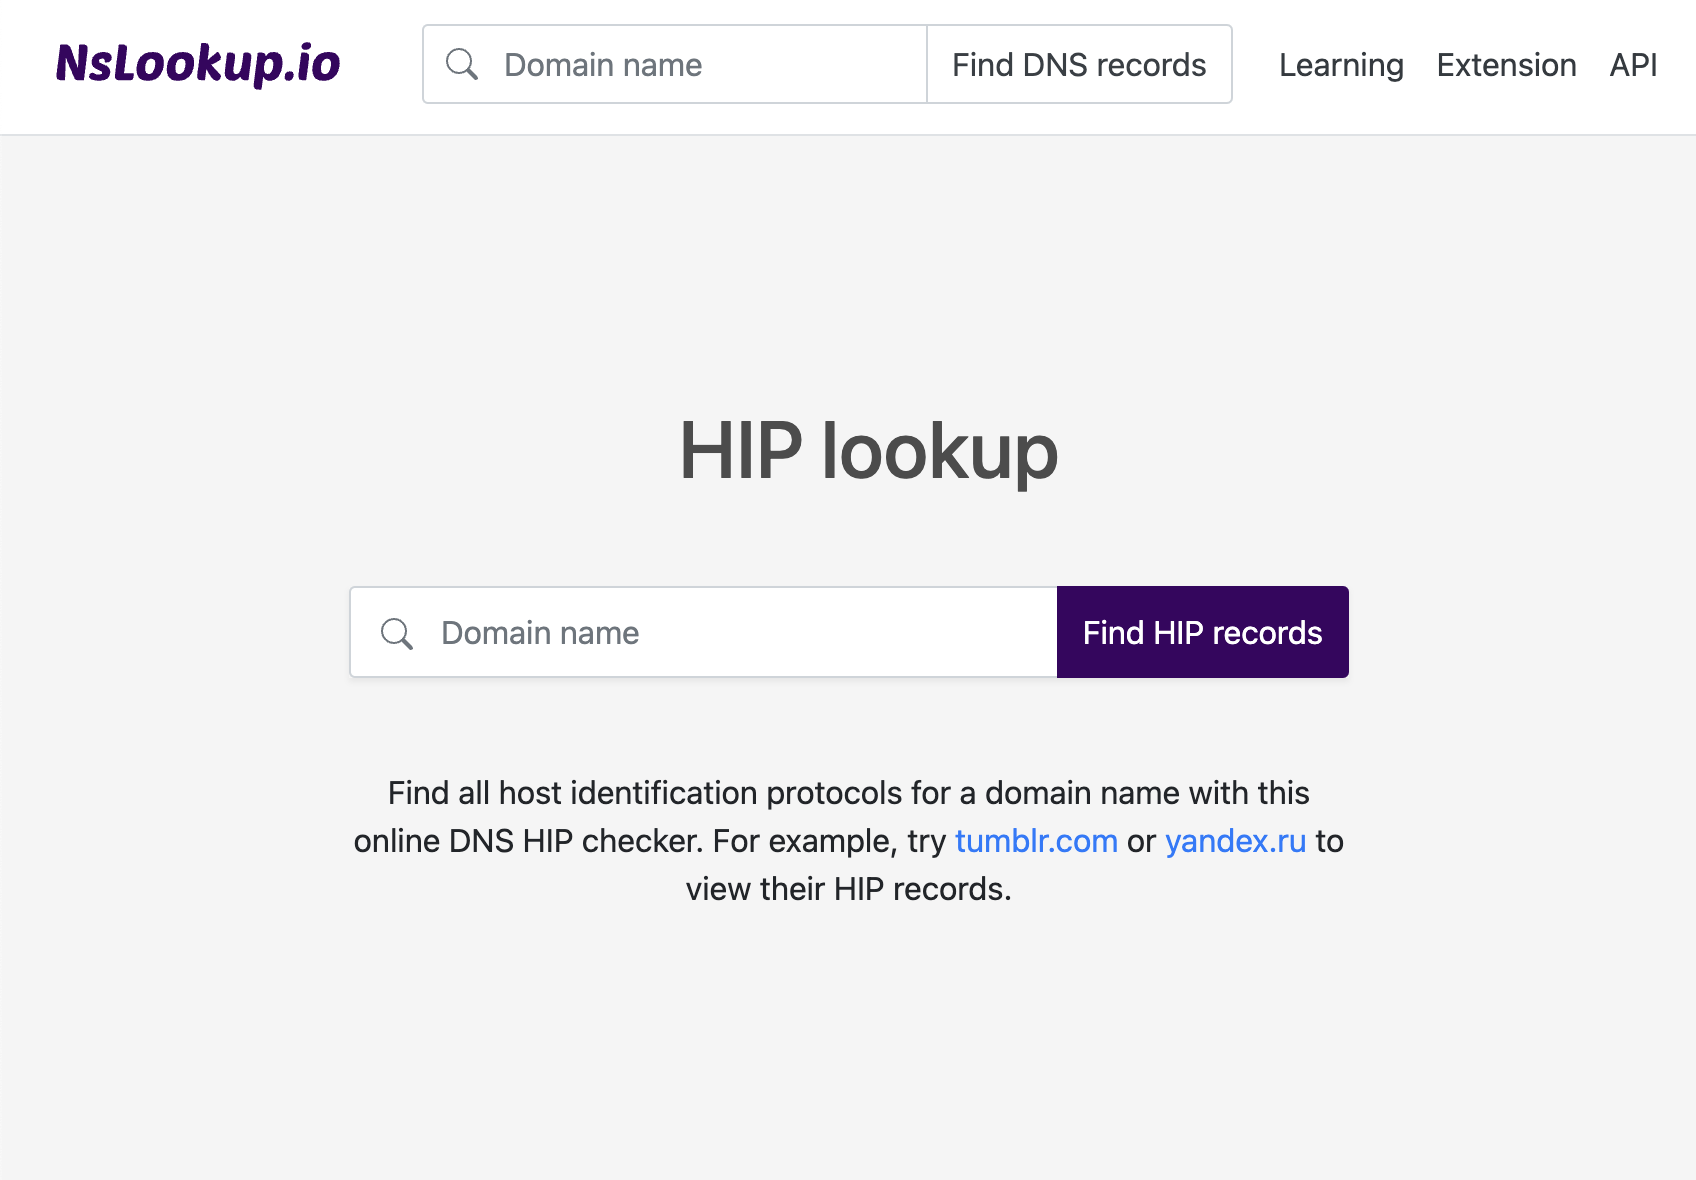 Open the HIP lookup tool